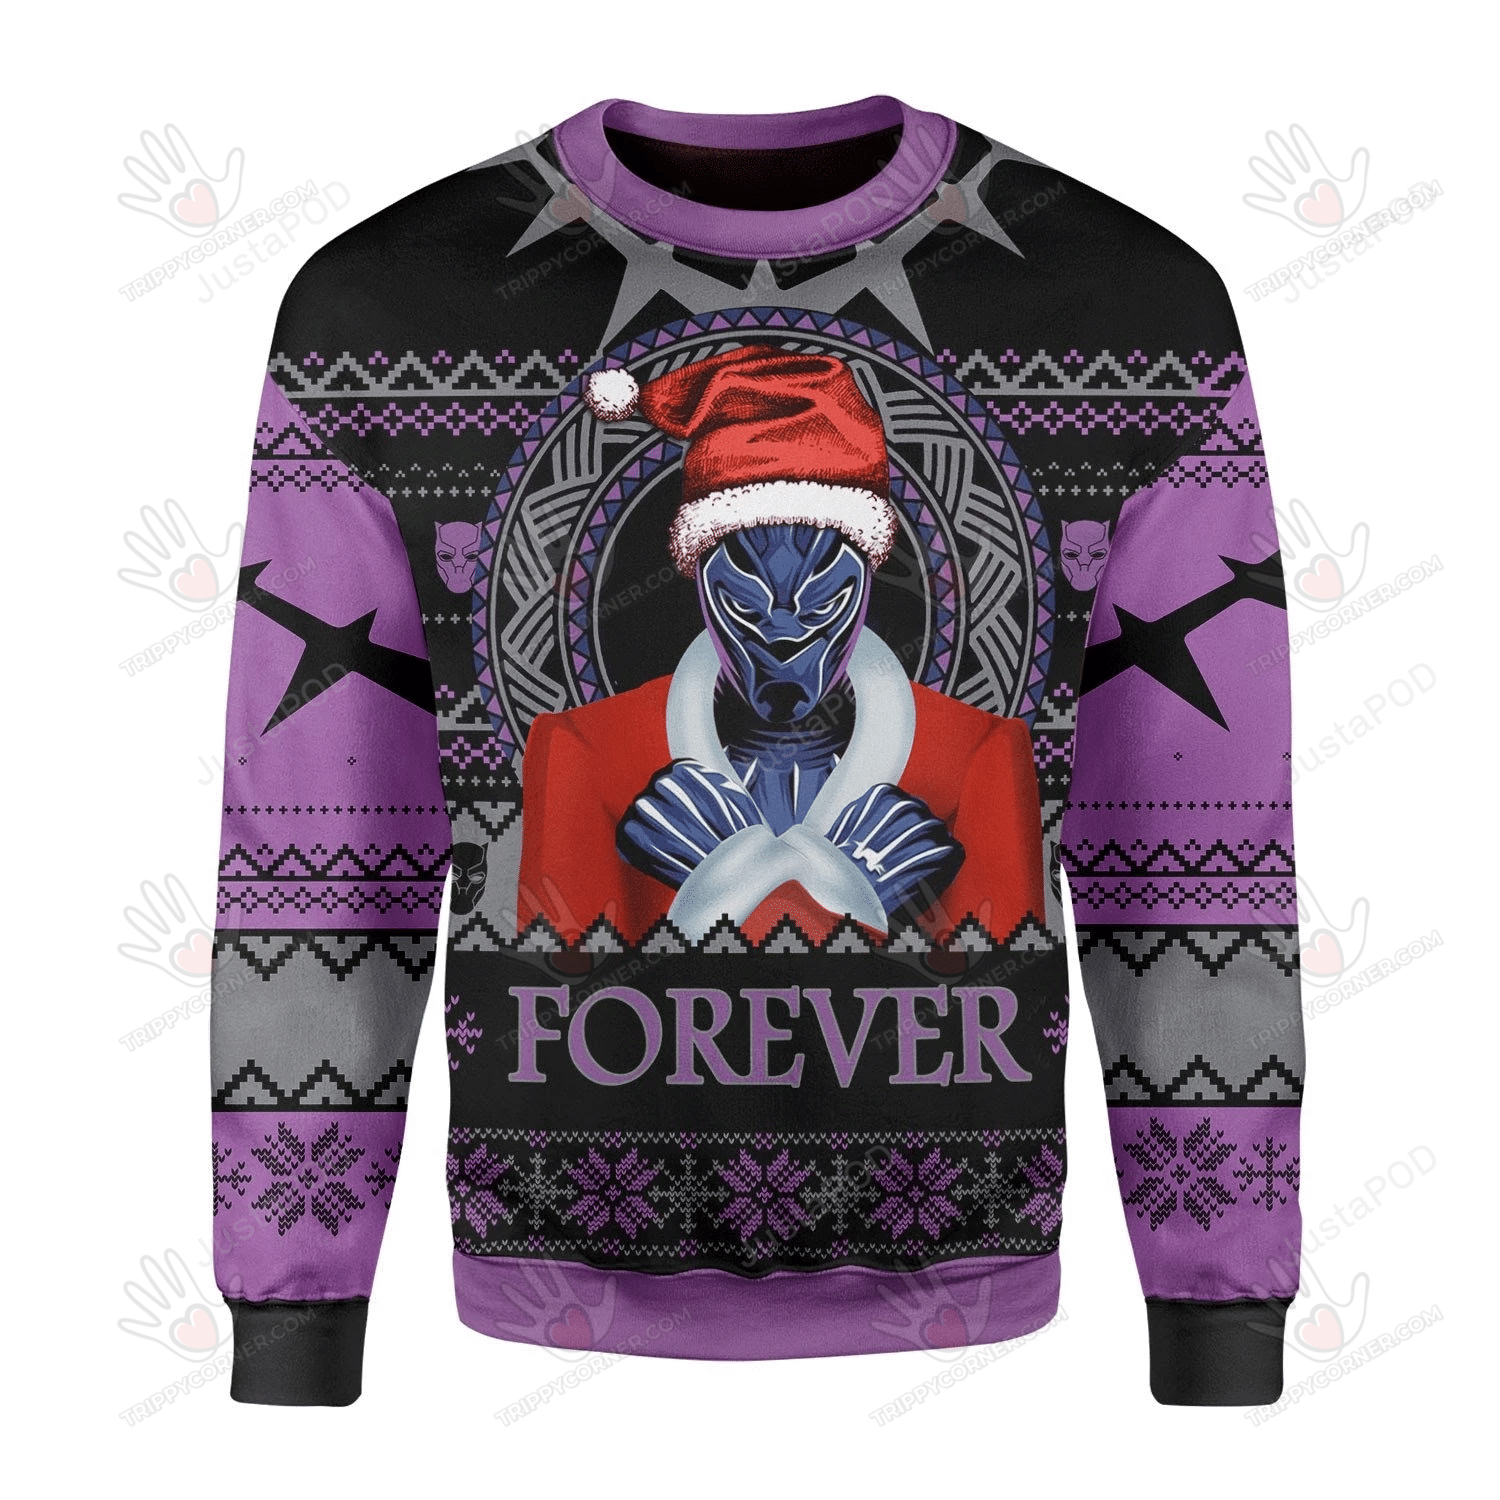 Forever Ugly Christmas Sweater, All Over Print Sweatshirt, Ugly Sweater, Ugly Sweater Christmas Gift   225